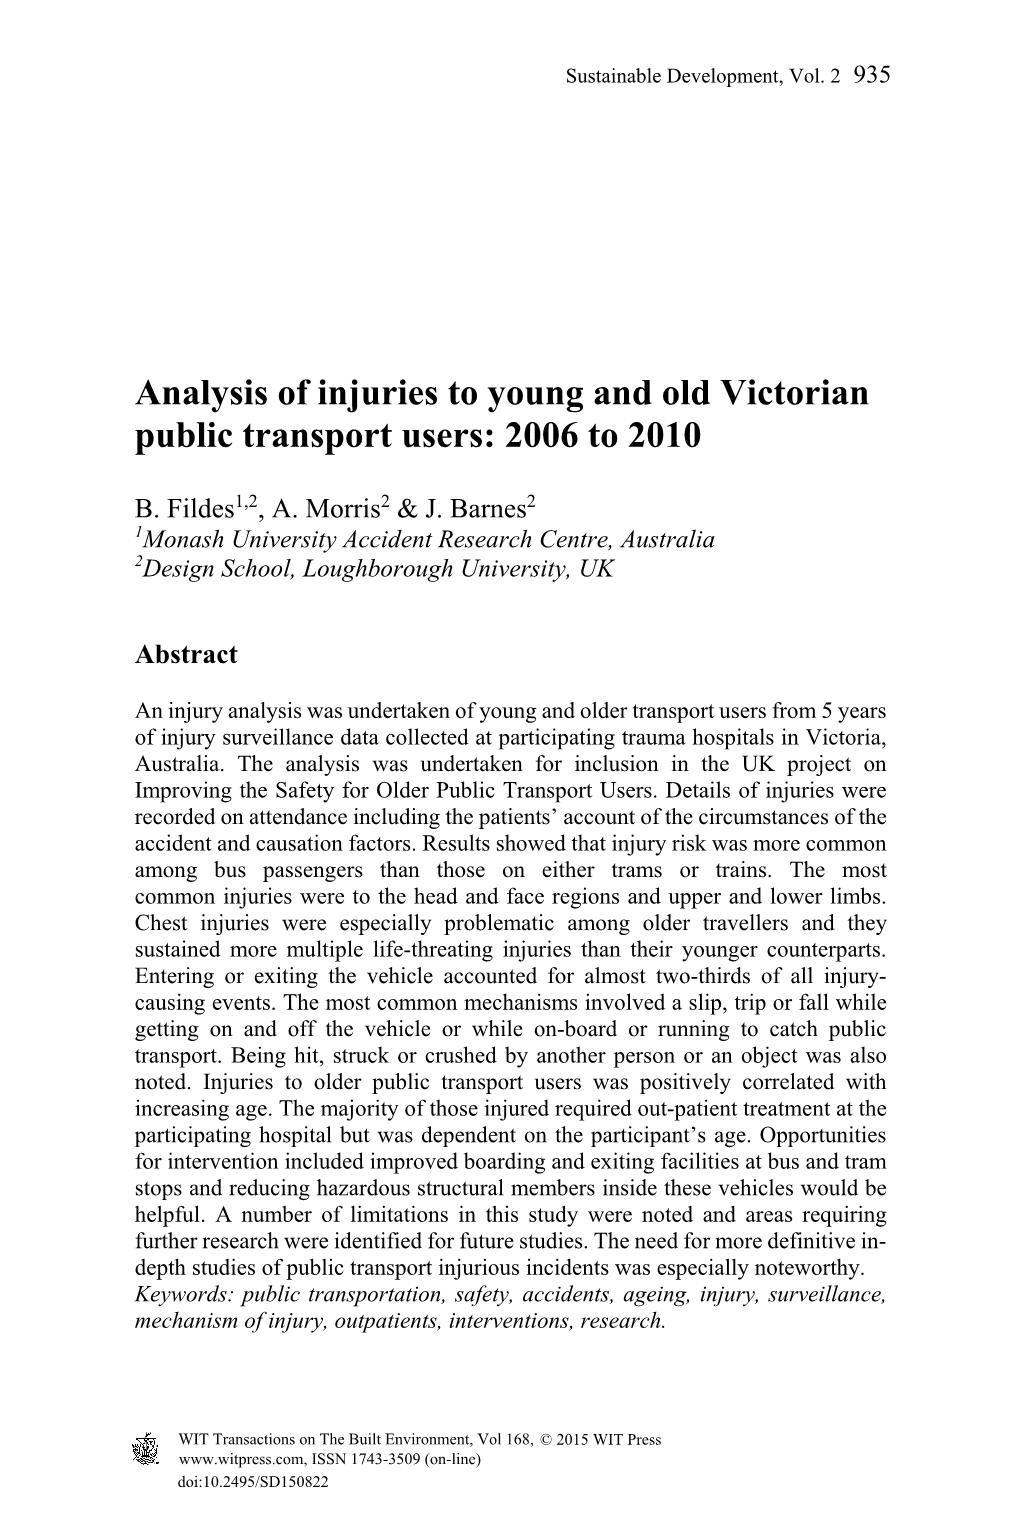 Analysis of Injuries to Young and Old Victorian Public Transport Users: 2006 to 2010